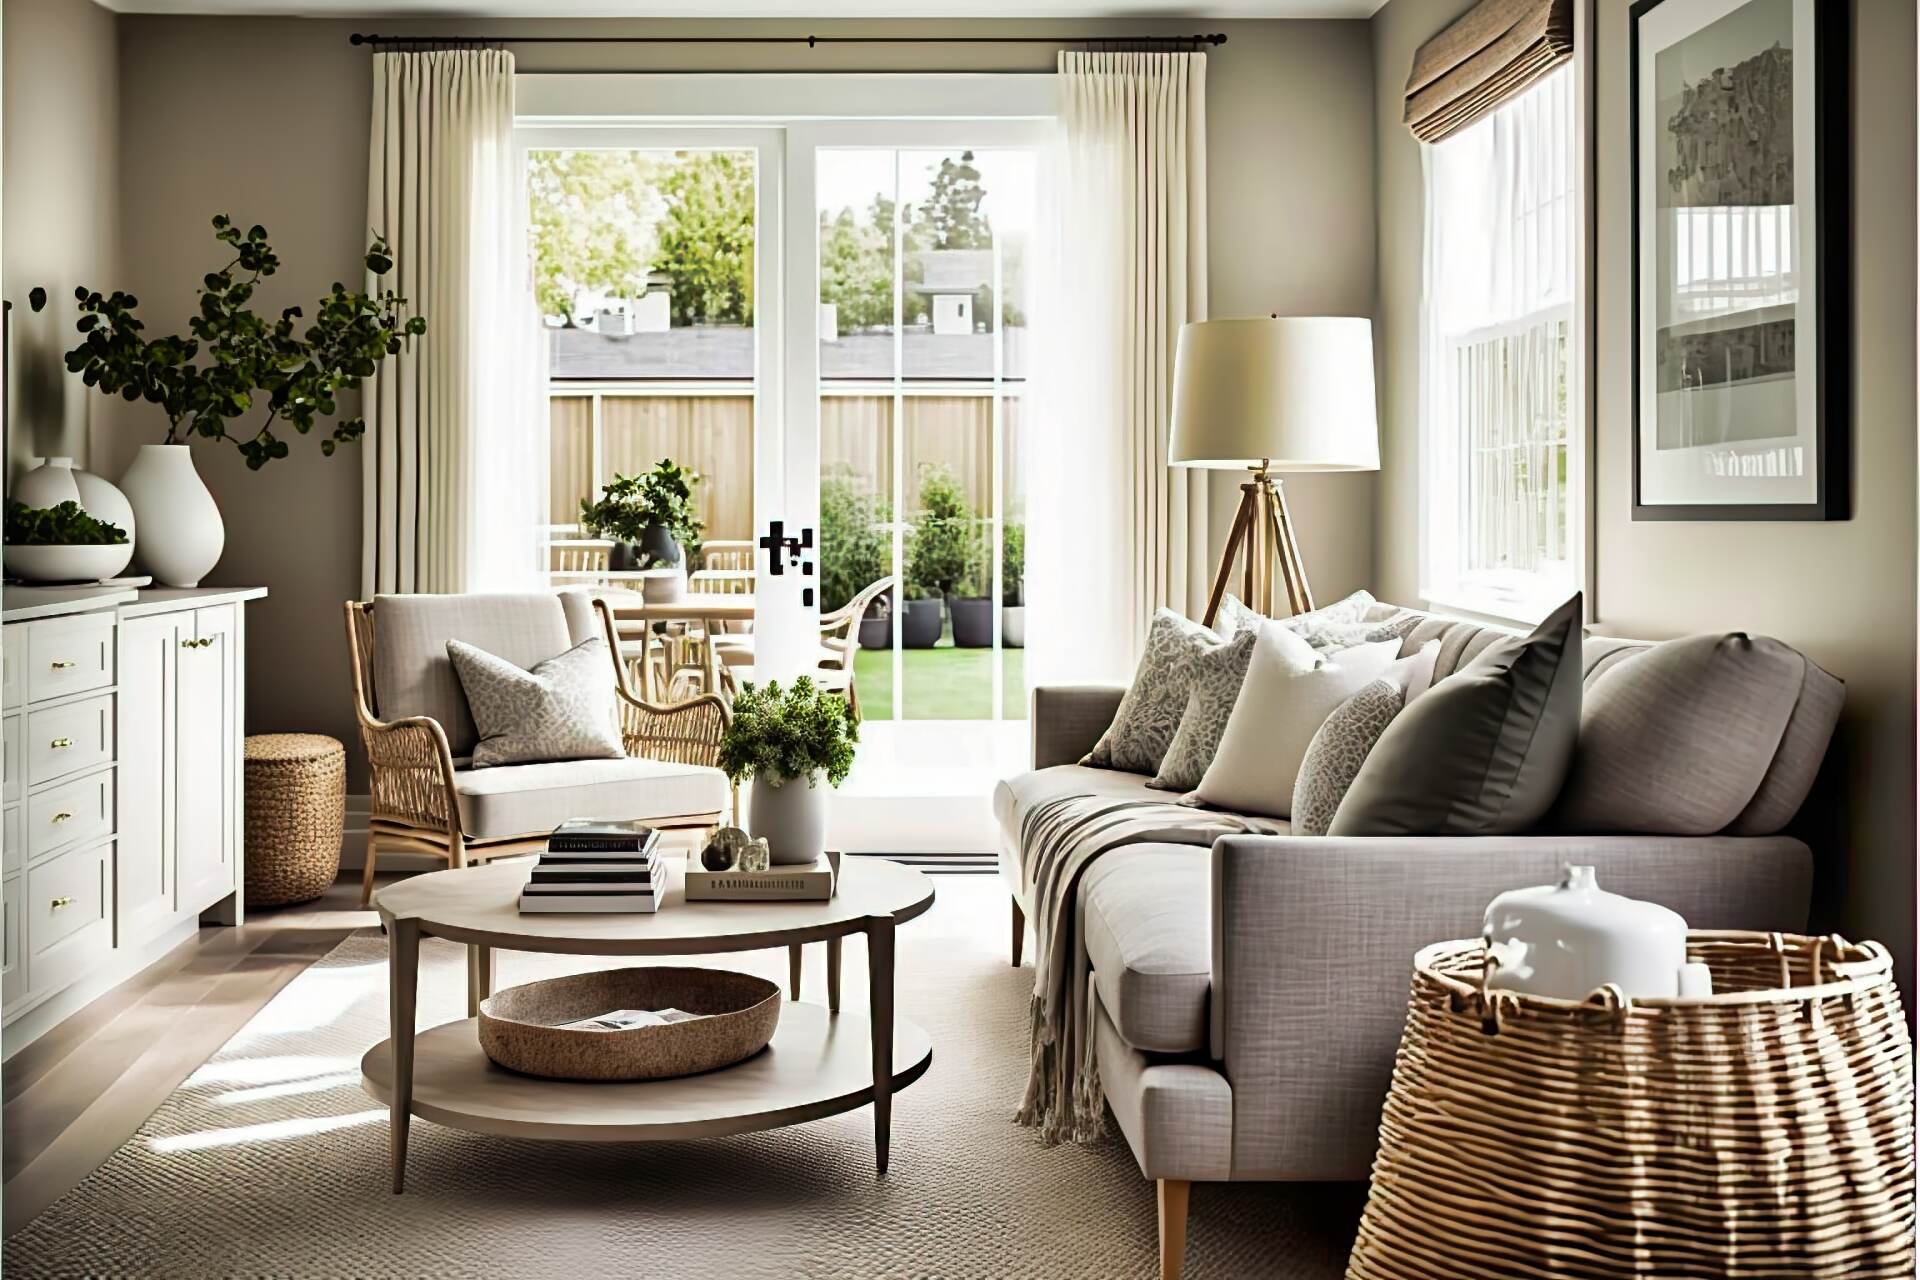 This Low-Key Modern Living Room Features Plenty Of Natural Light And Neutral Colors. A Comfortable Grey Sofa And Matching Armchair Provide The Perfect Place To Relax, While A Light Wooden Coffee Table And Wicker Side Tables Complete The Look. A Small Rug In Light Beige Adds A Cozy Touch To The Space.